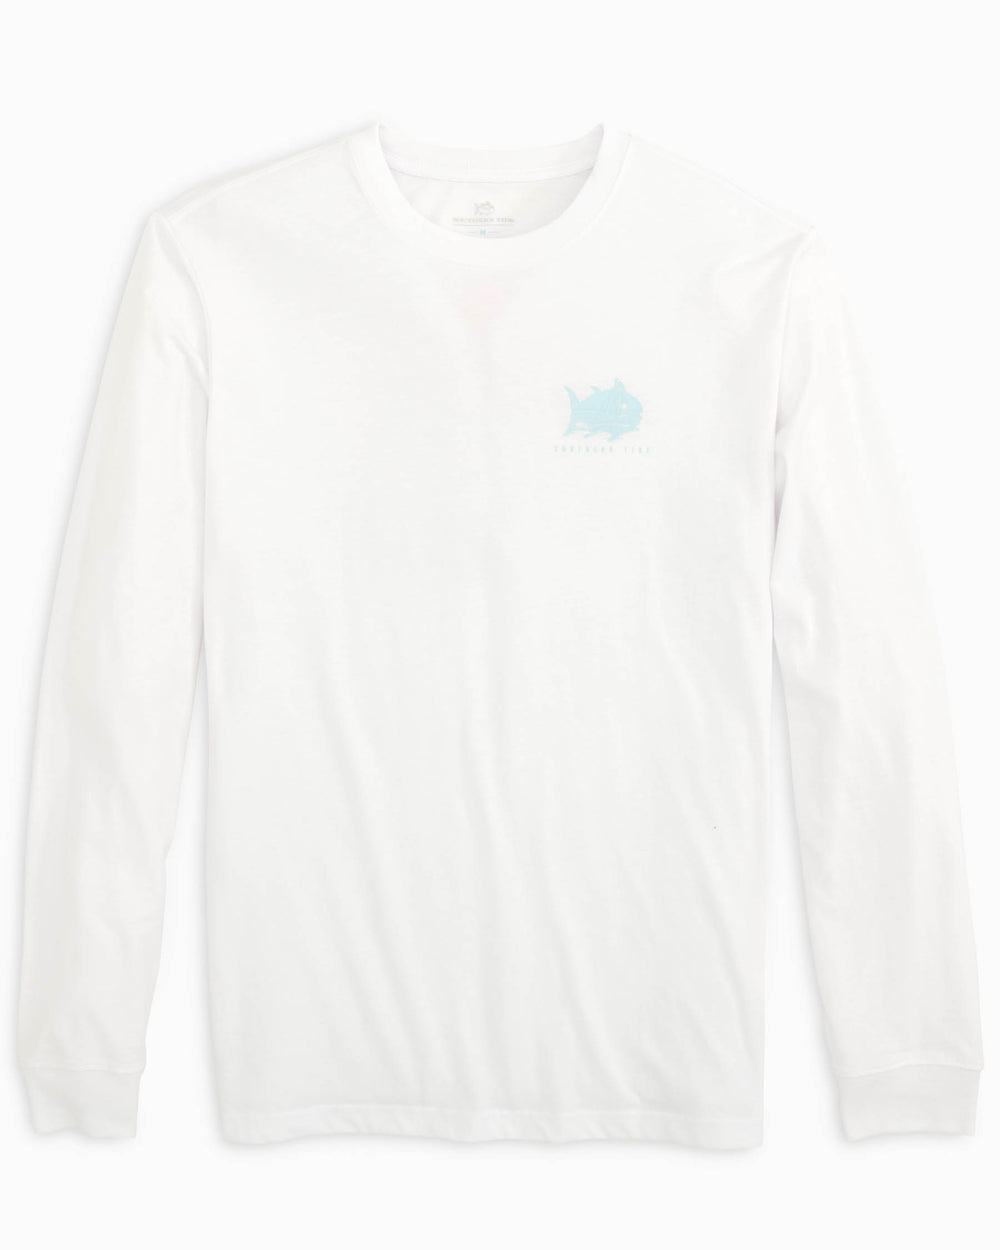 The front view of the Southern Tide Southern Sailing Long Sleeve T-Shirt by Southern Tide - Classic White